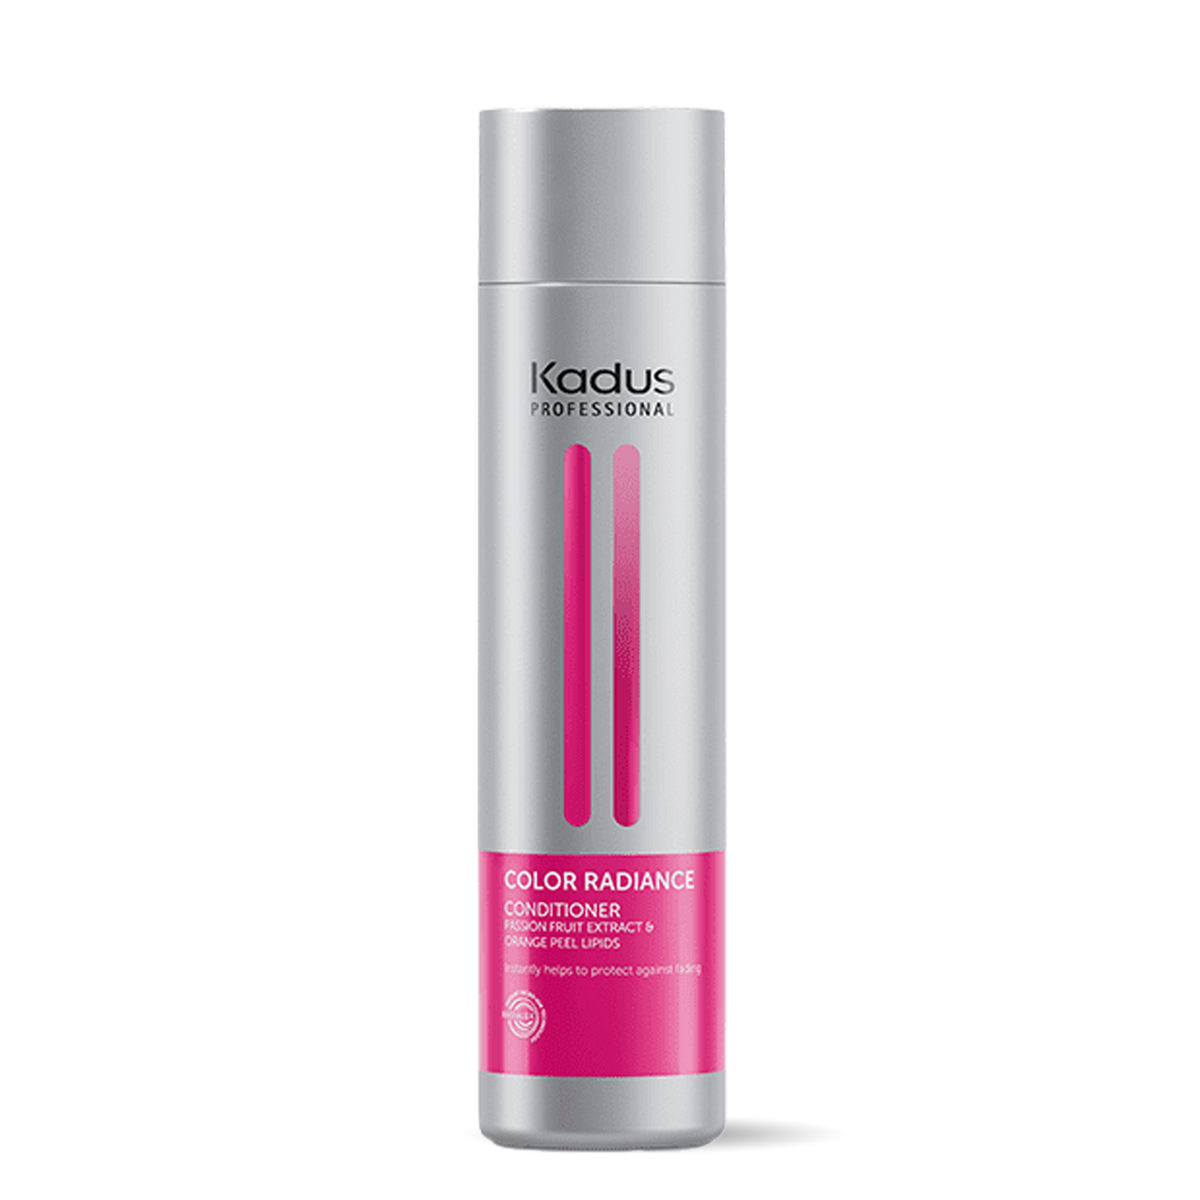 Kadus Color Radiance Conditioner 250ml - by Kadus Professionals |ProCare Outlet|